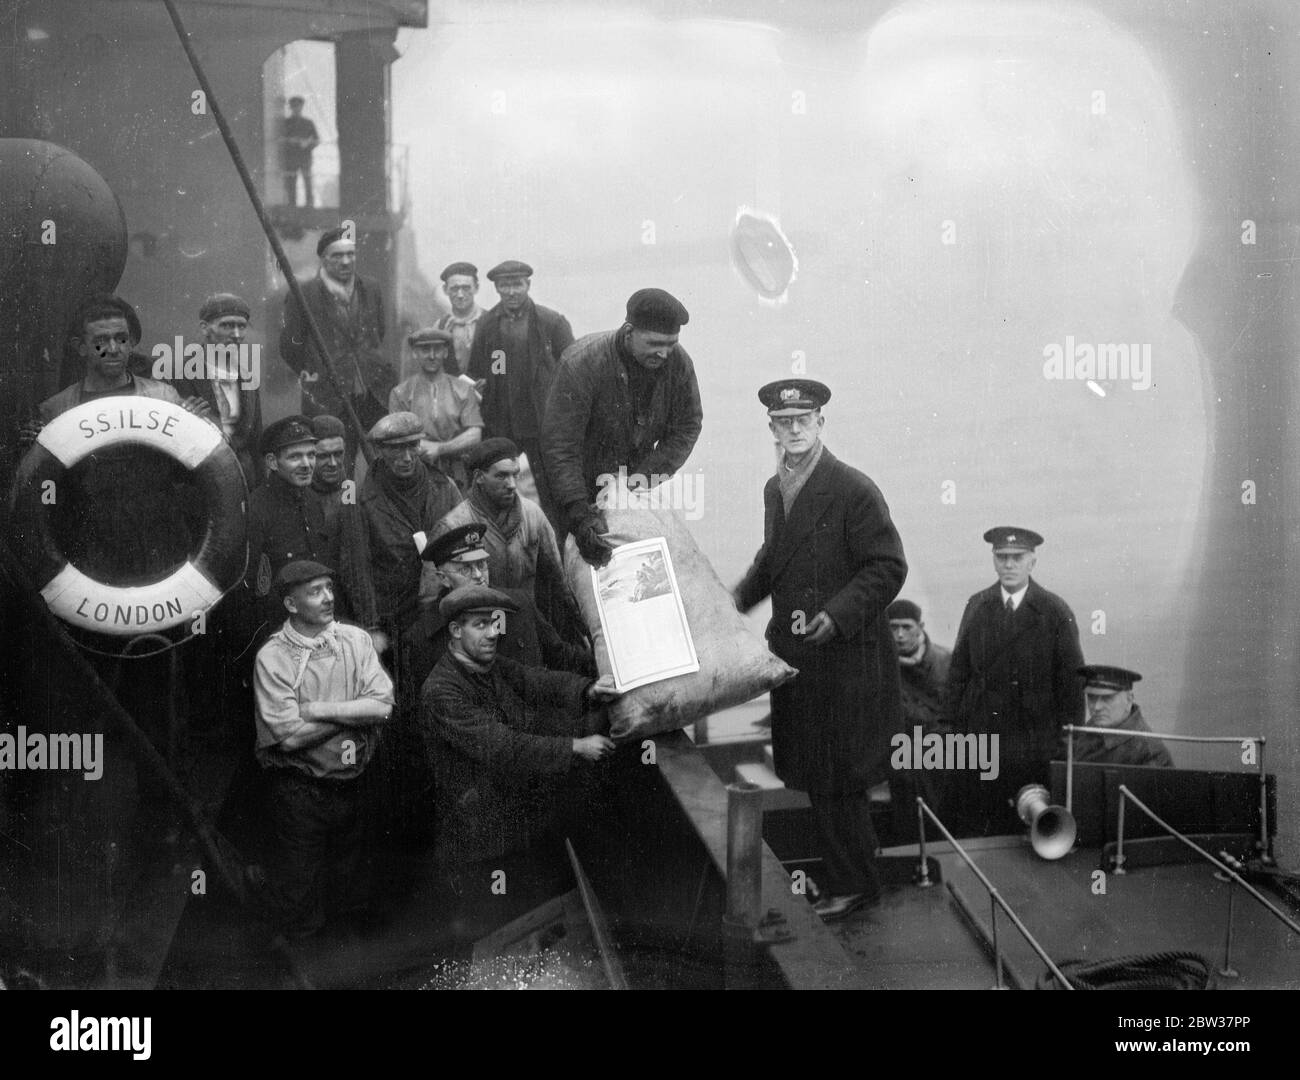 Distribution of christmas gifts to Thames Watermen . The annual distribution of Christmas gifts to Thames Watermen by the missions to seaman took place on the river when Reverend F J Cutts distributed gifts . Photo shows ; The Reverend F H Cutts distributing gifts to a Sunderland collier on the Thames near Woolwich . 21 December 1933 Stock Photo